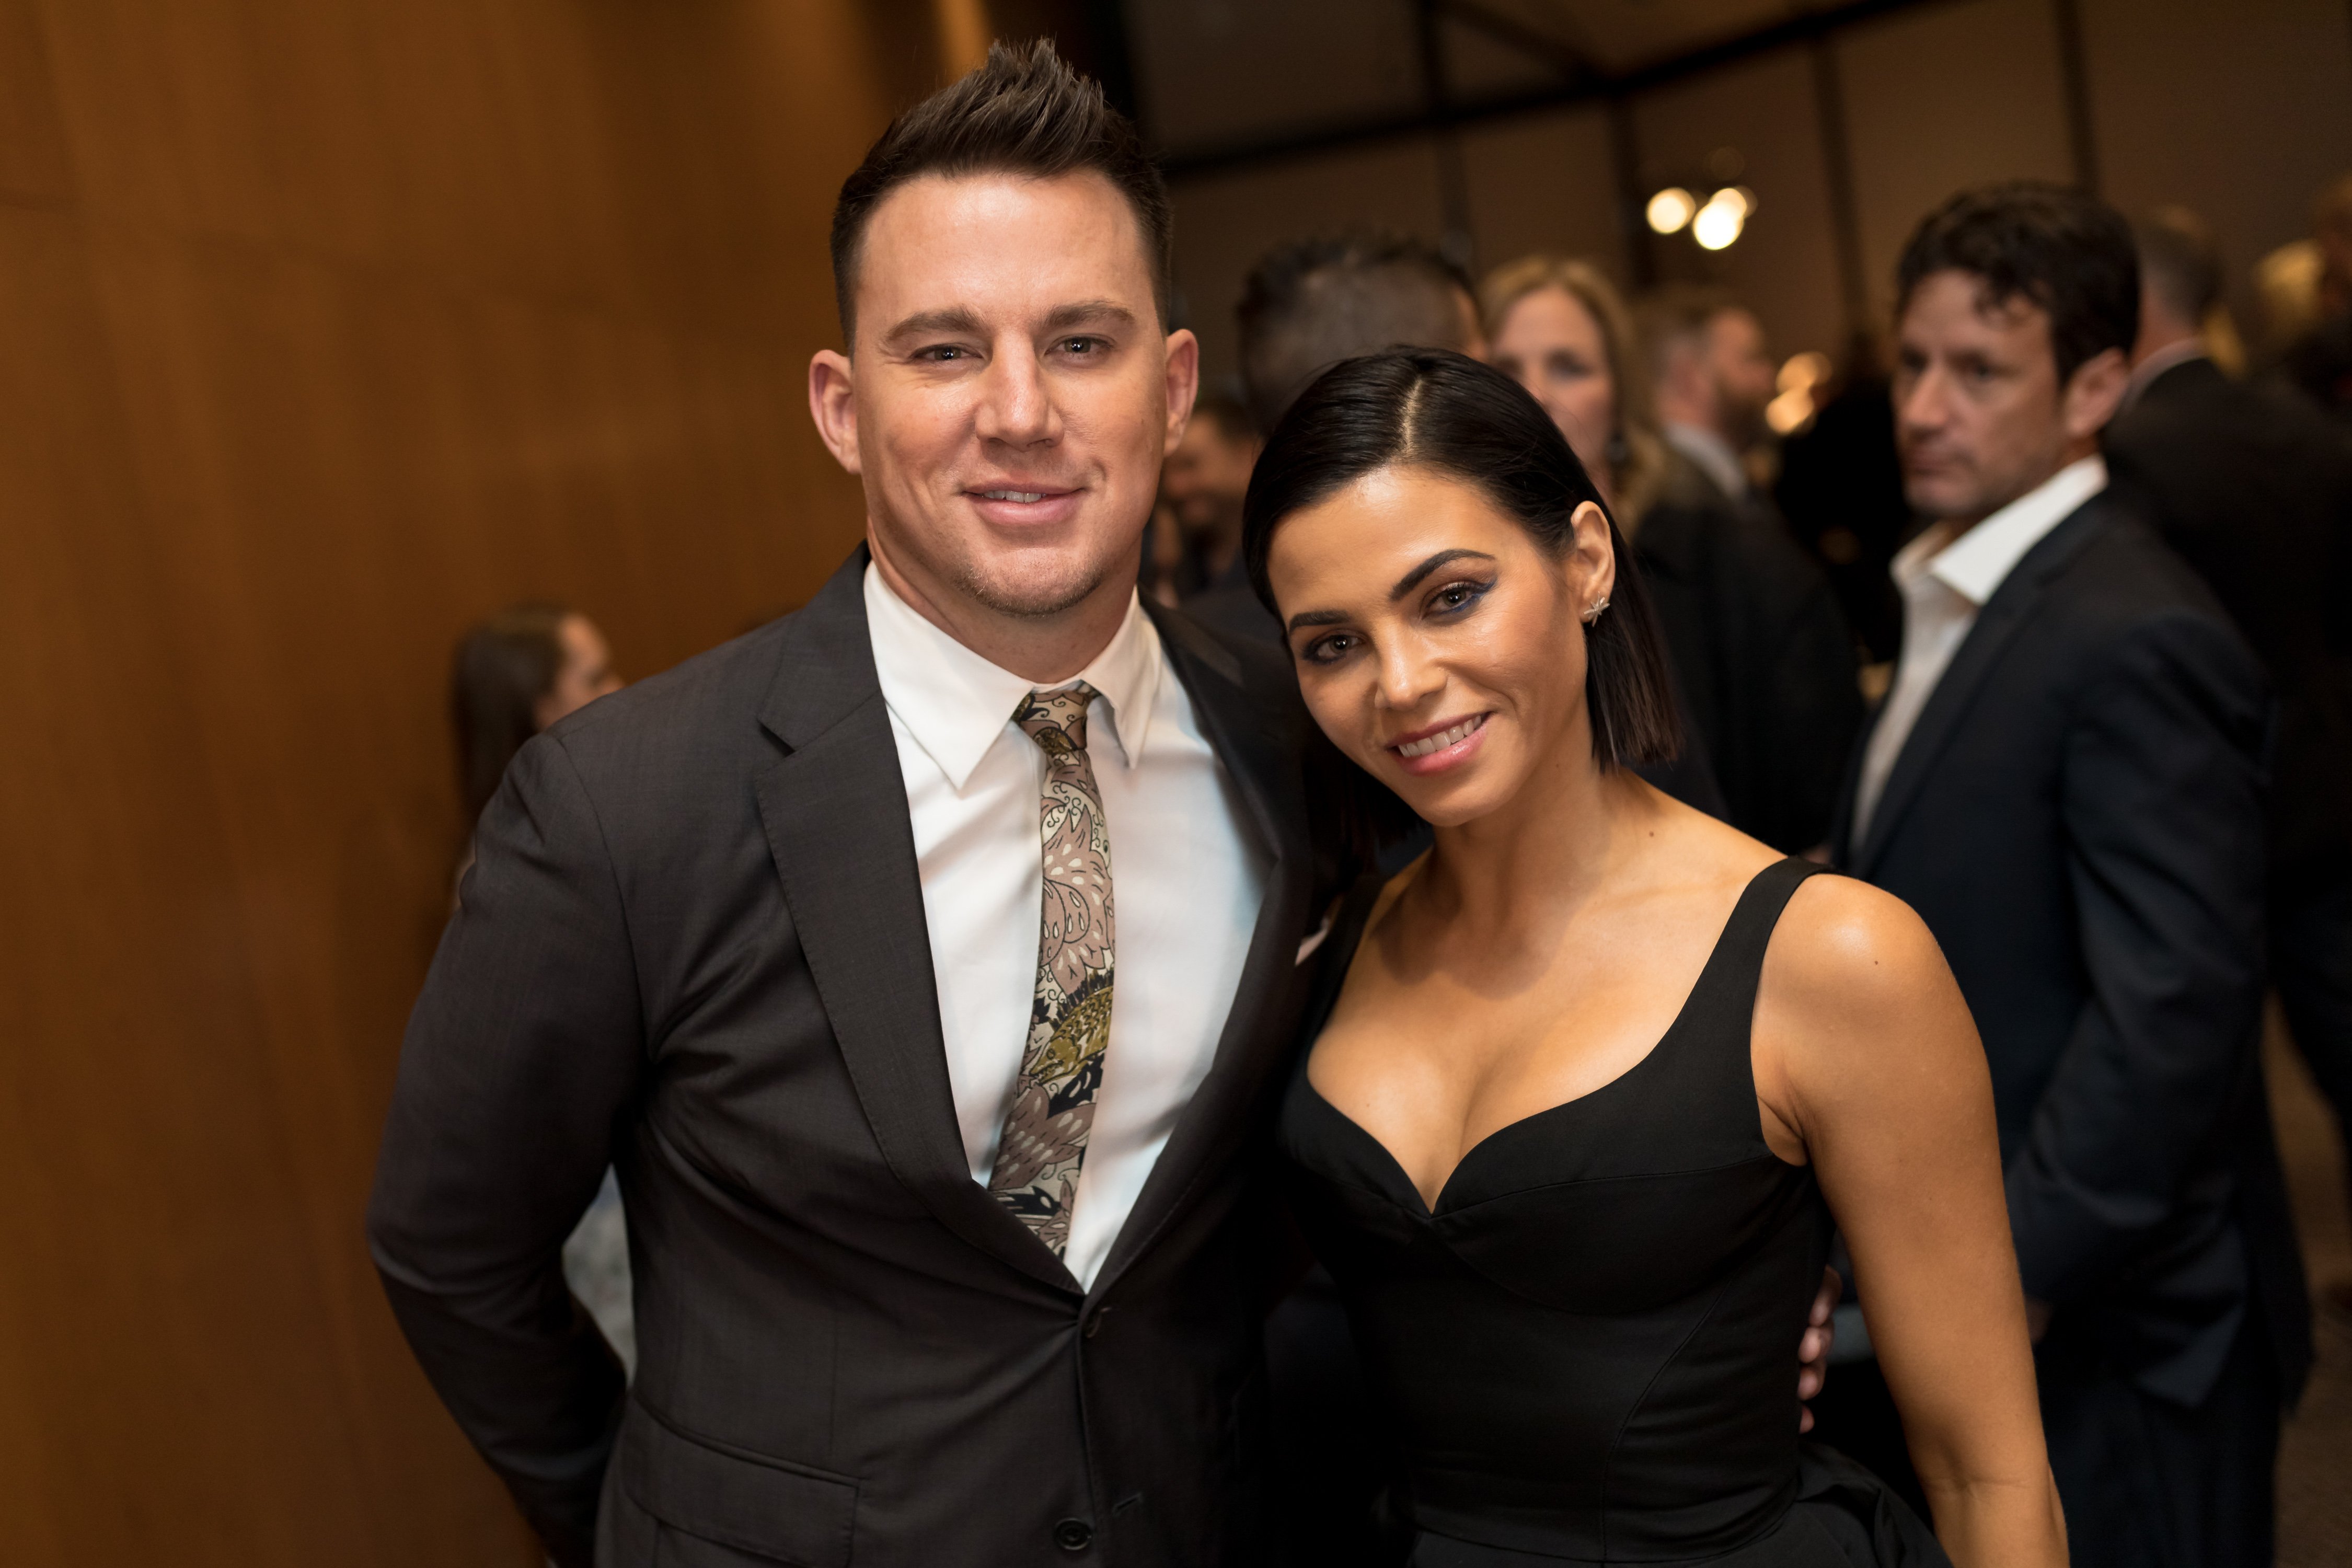 Channing Tatum and Jenna Dewan Tatum attend the after party at The Directors Guild Of America on November 6, 2017, in Los Angeles, California. | Source: Getty Images.